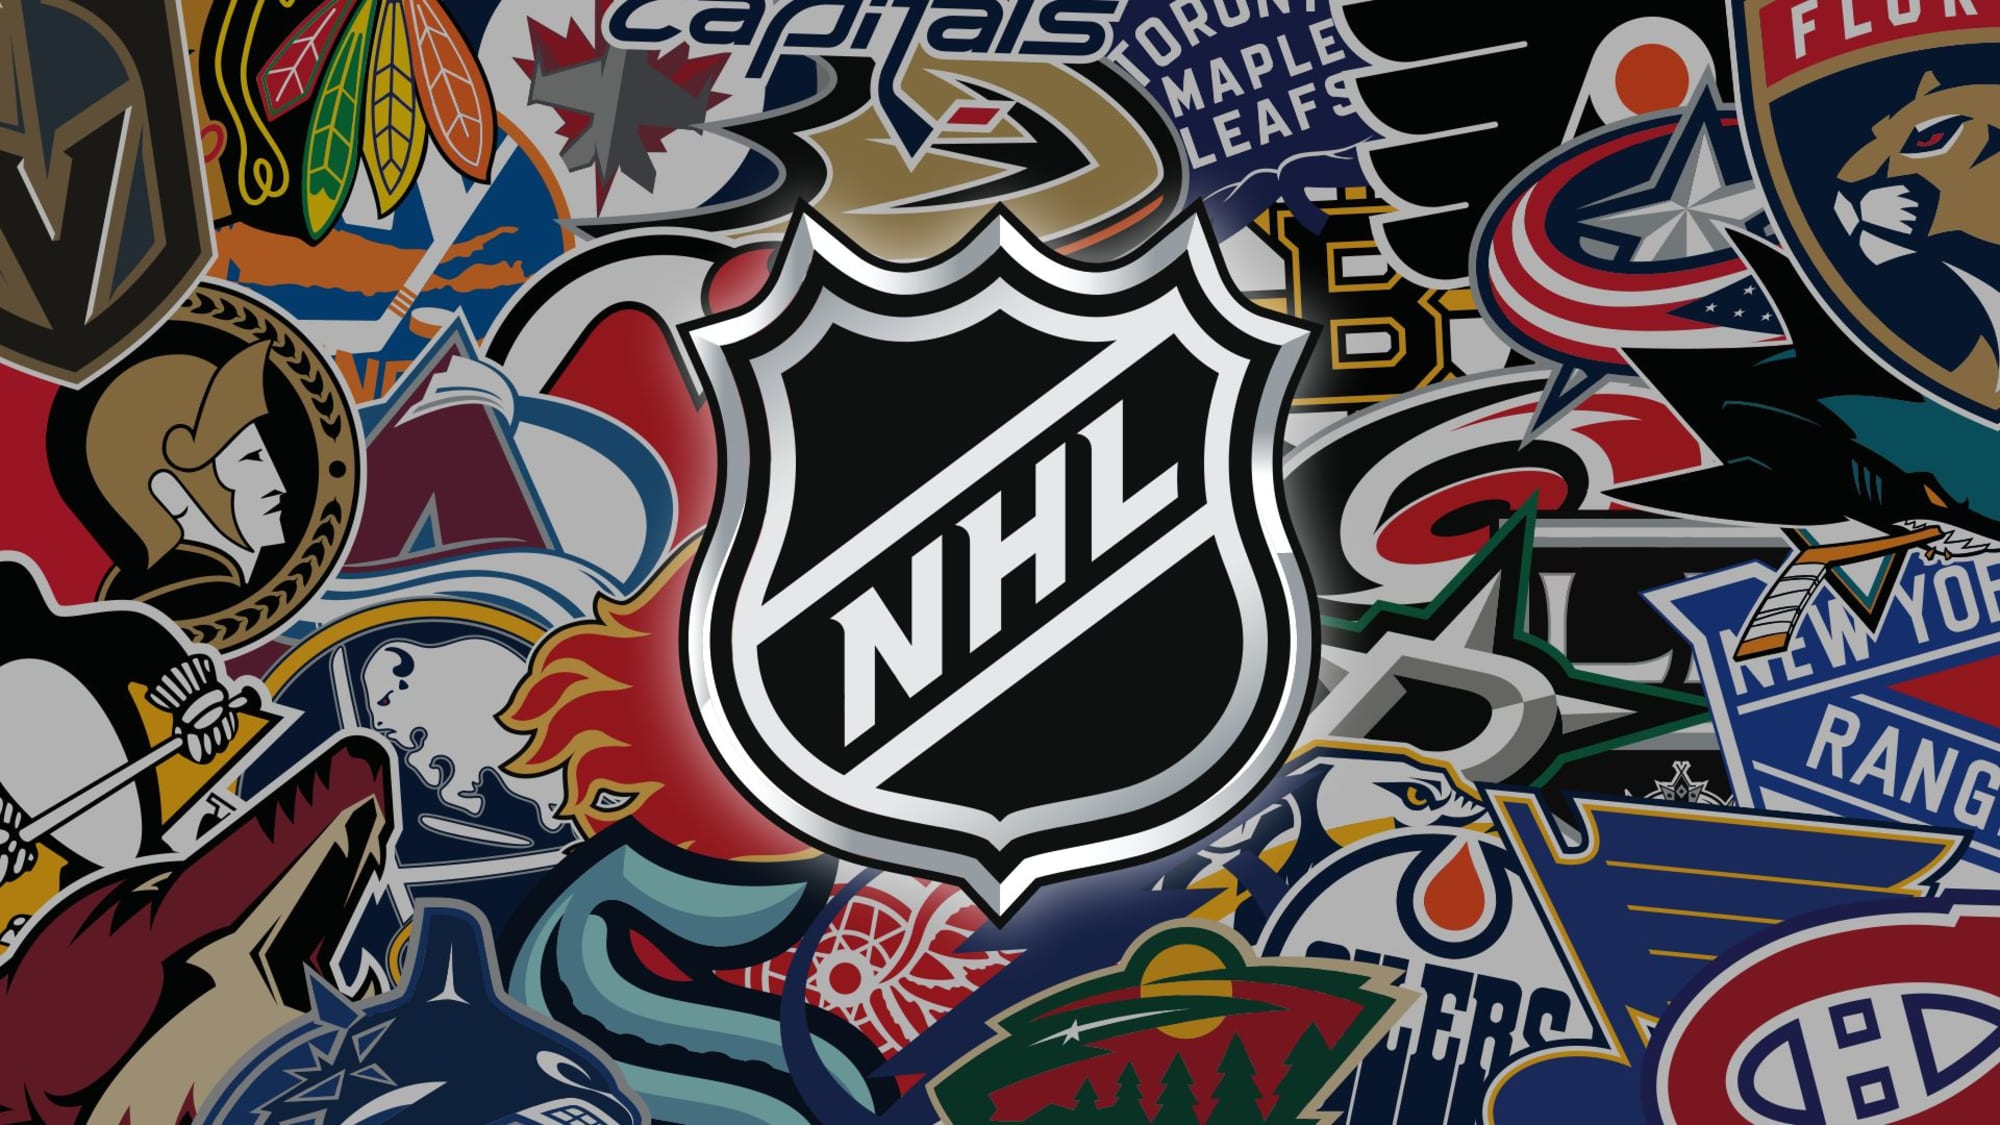 NHL 14 - Cover Art Wallpapers